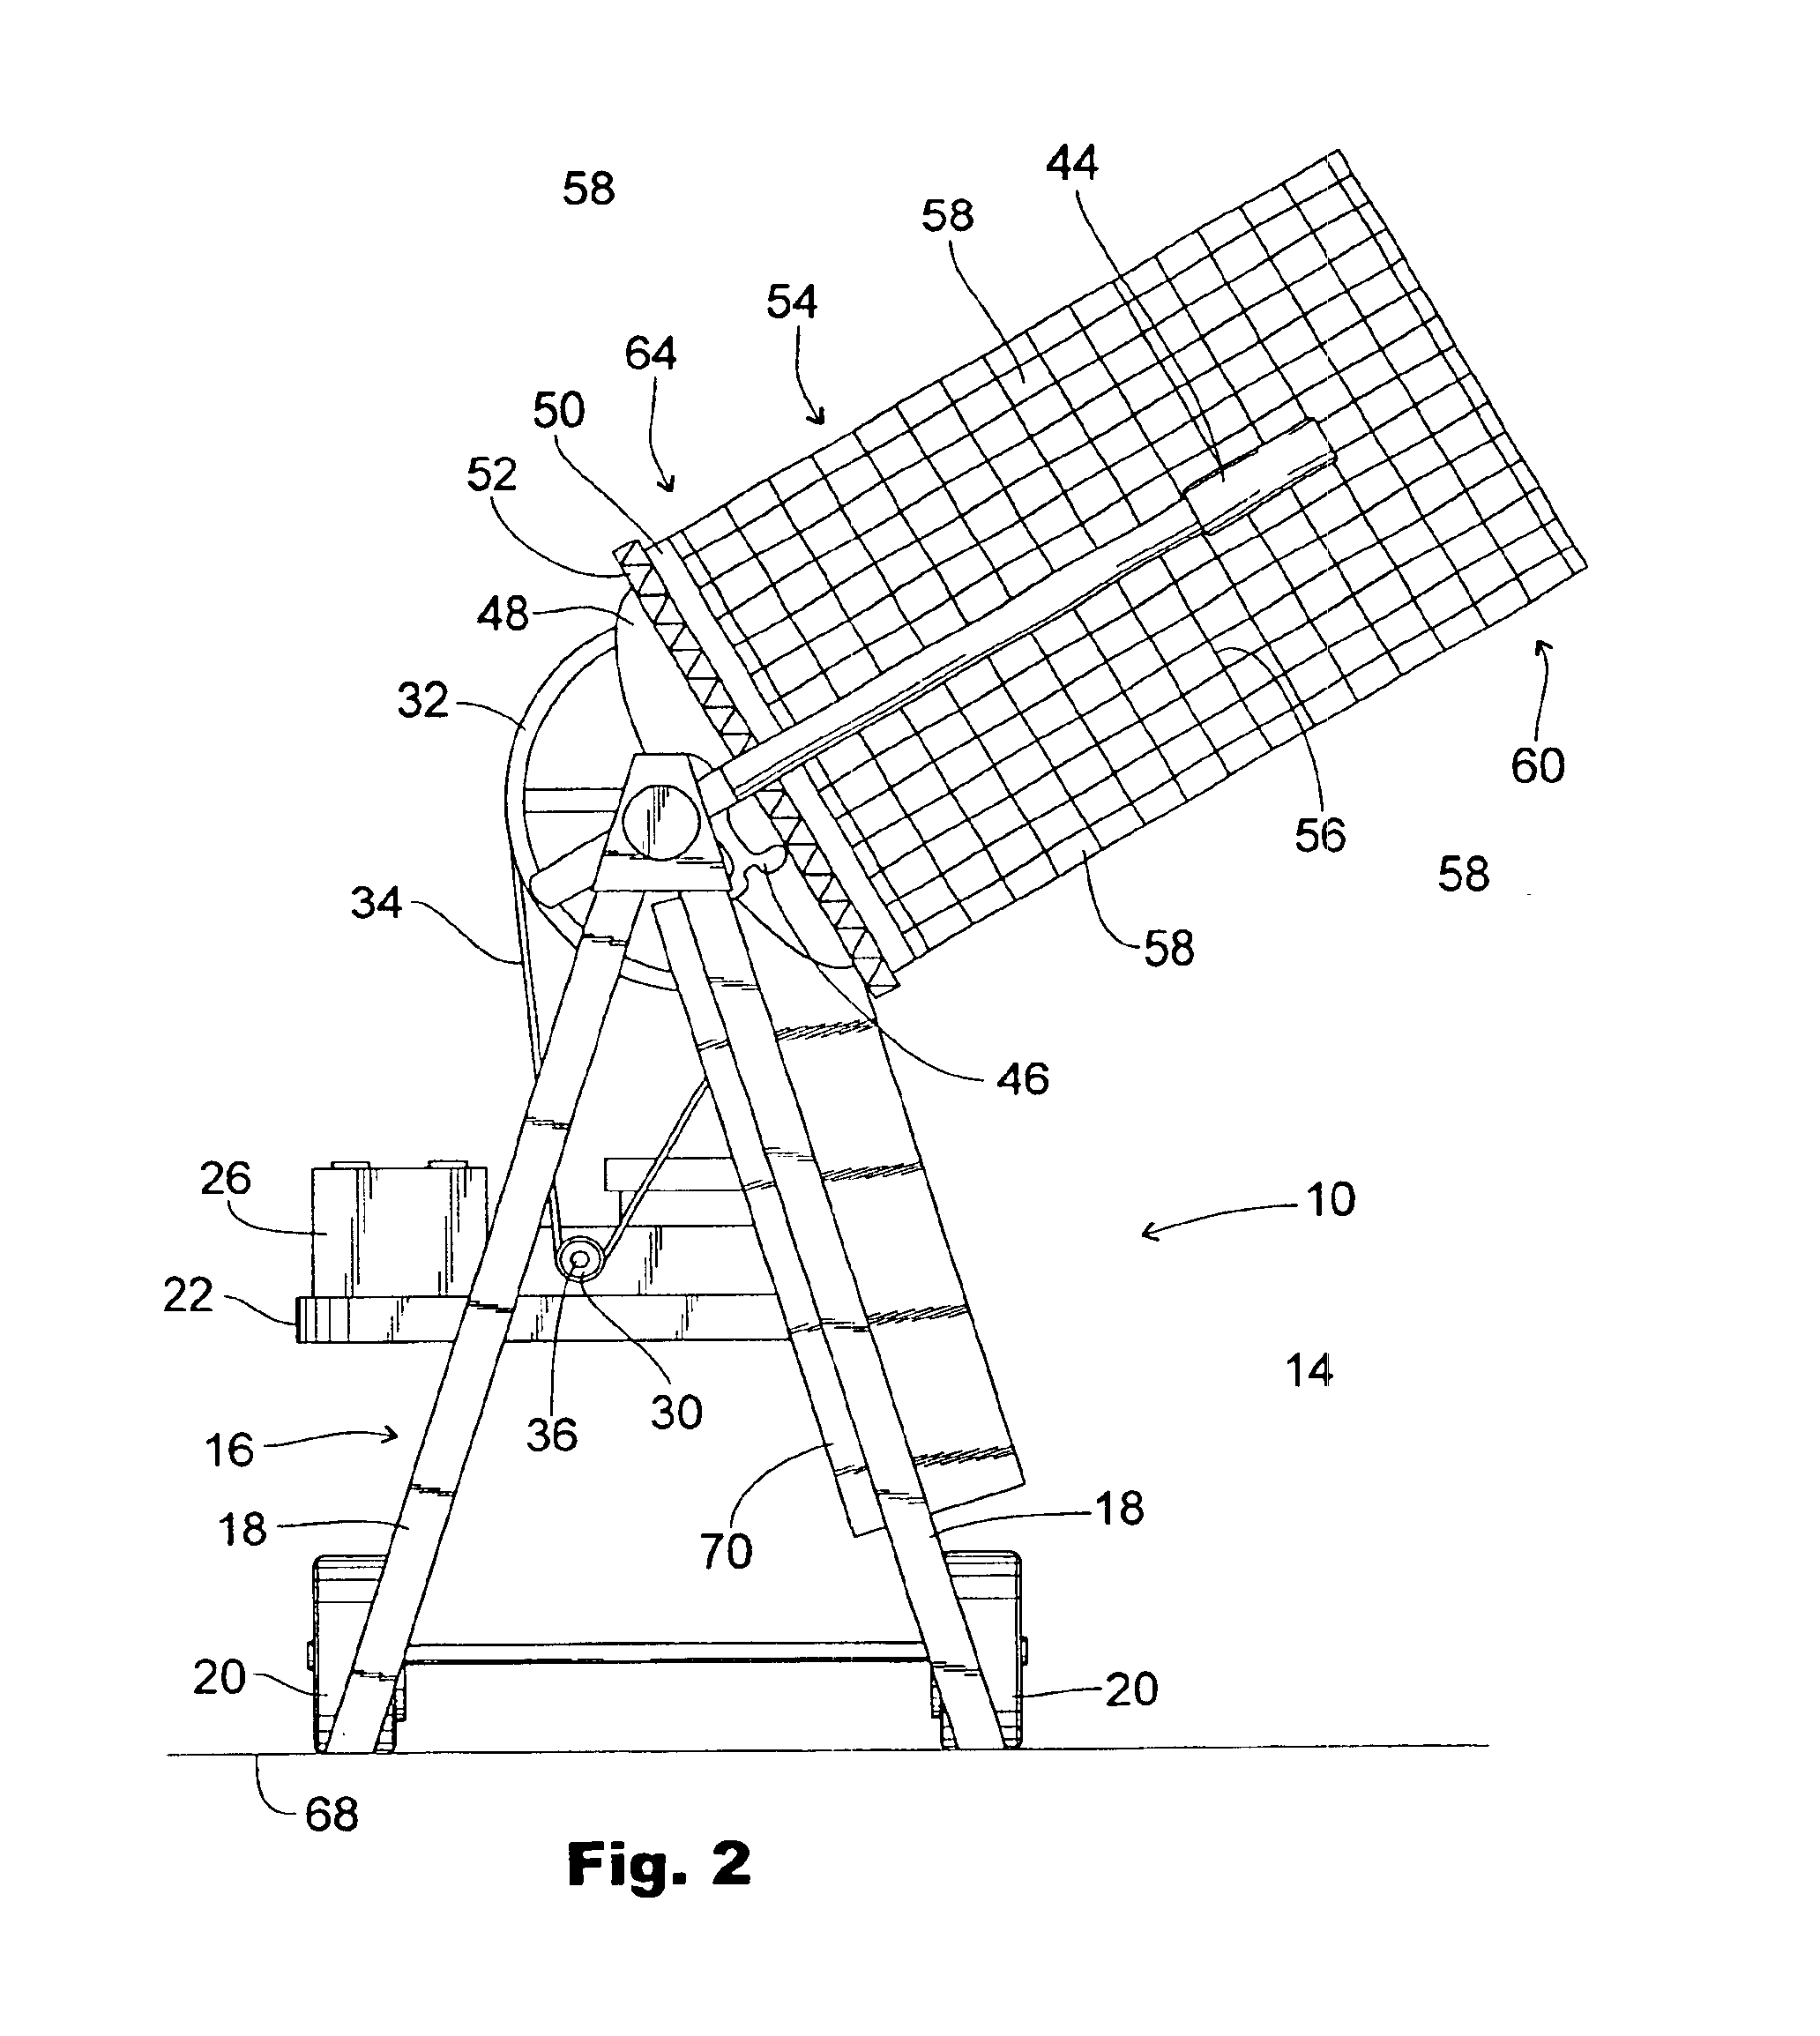 Garden screening device for sifting and sorting material